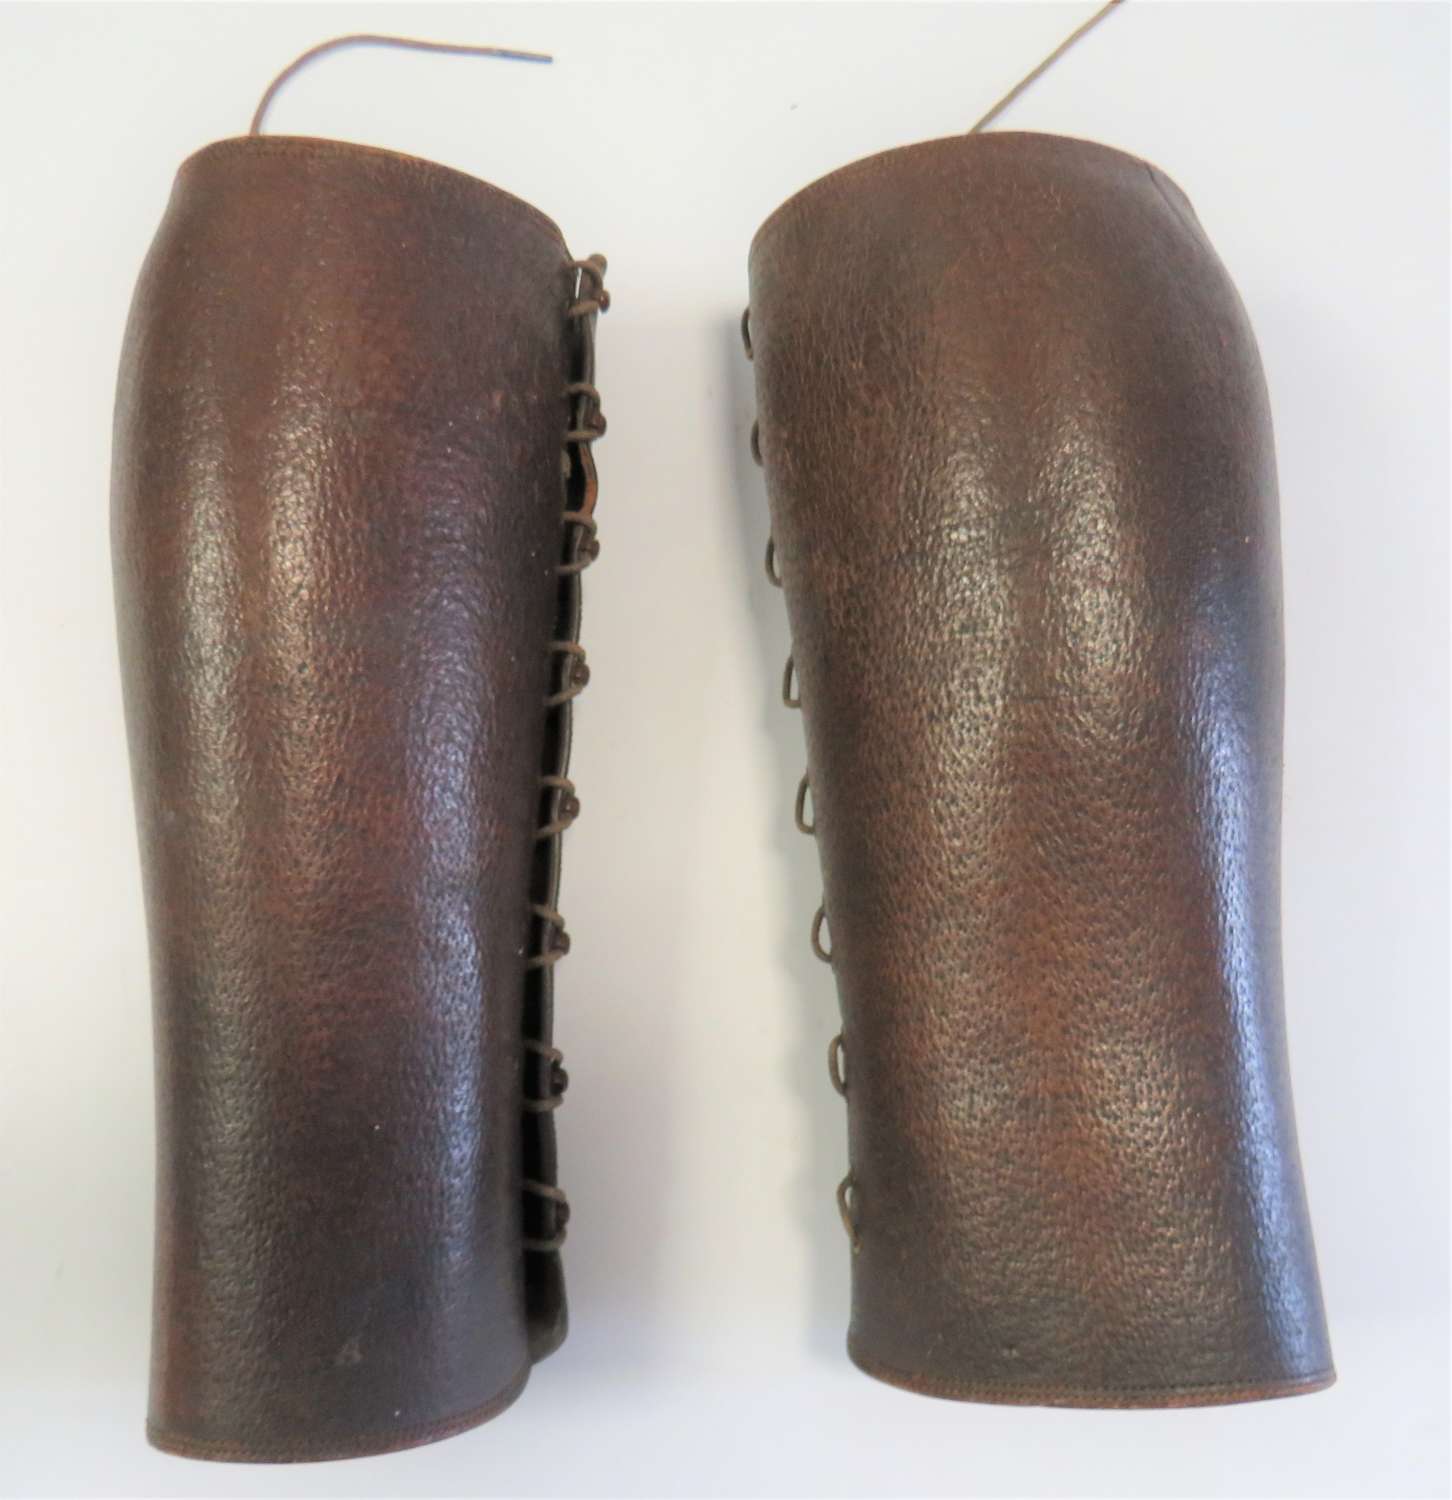 Pair of WW1 Period Leather Officer Gaiters